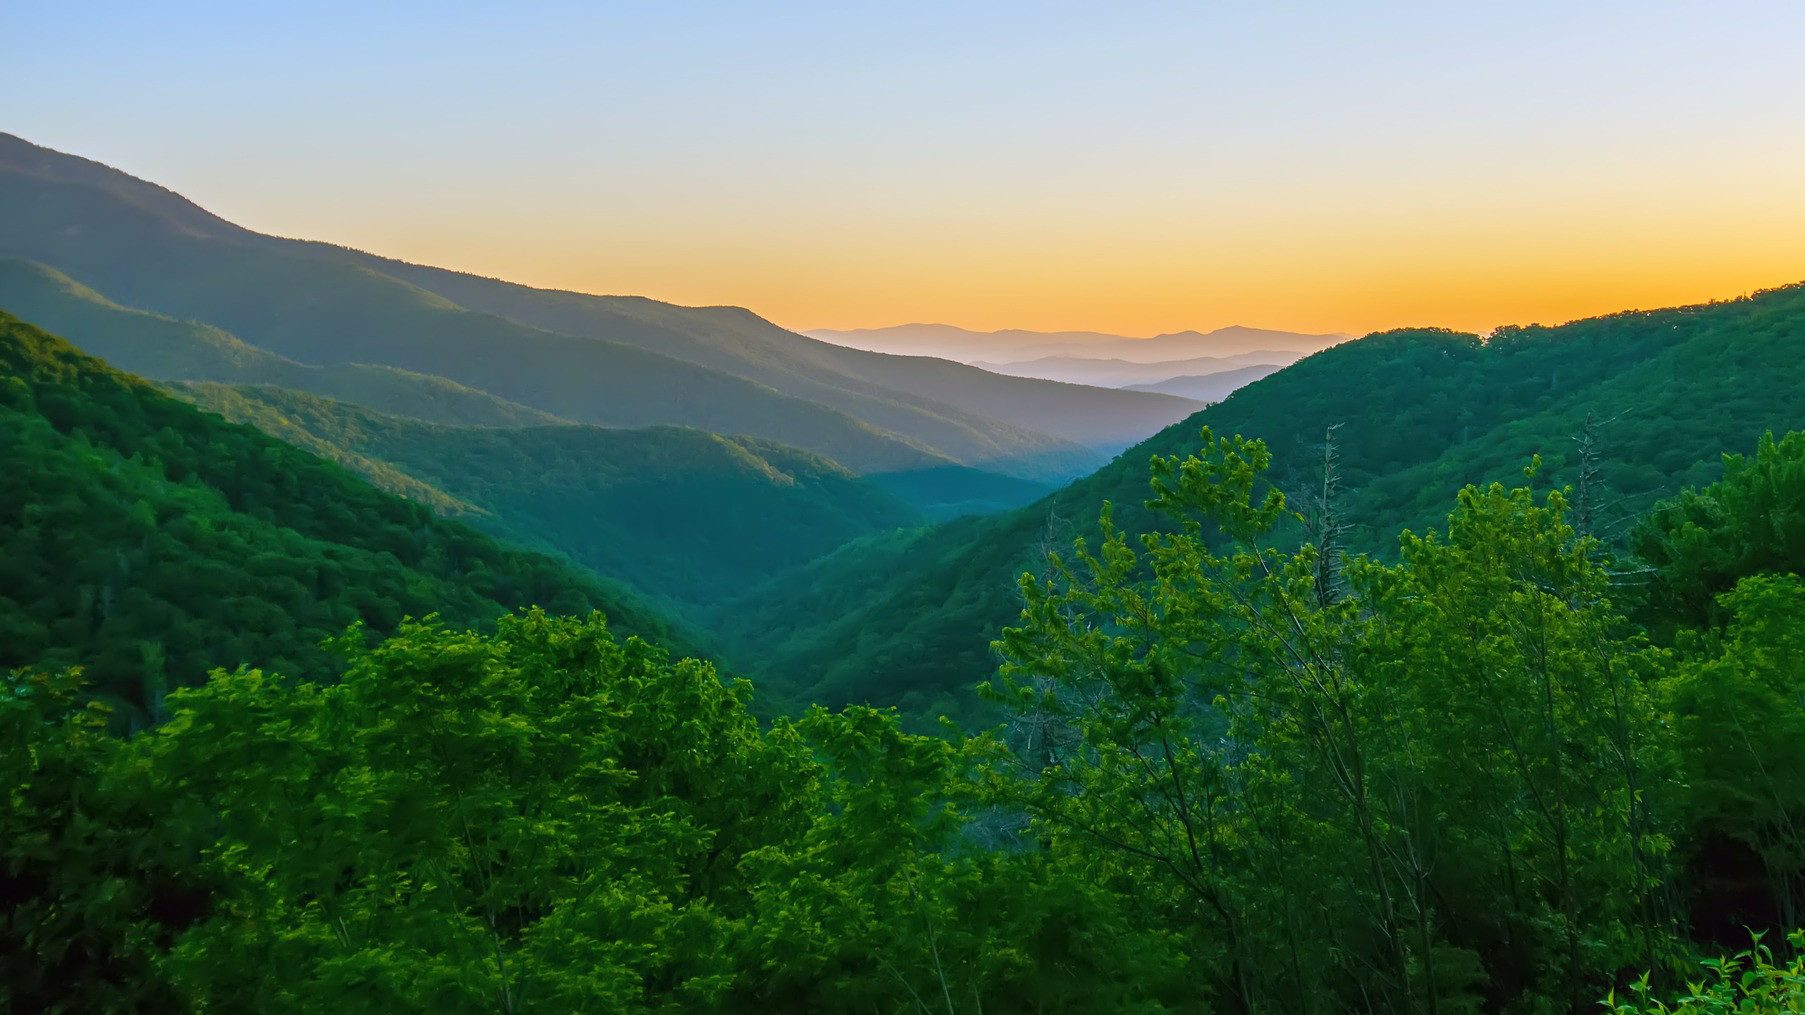 Sunrise over green mountains